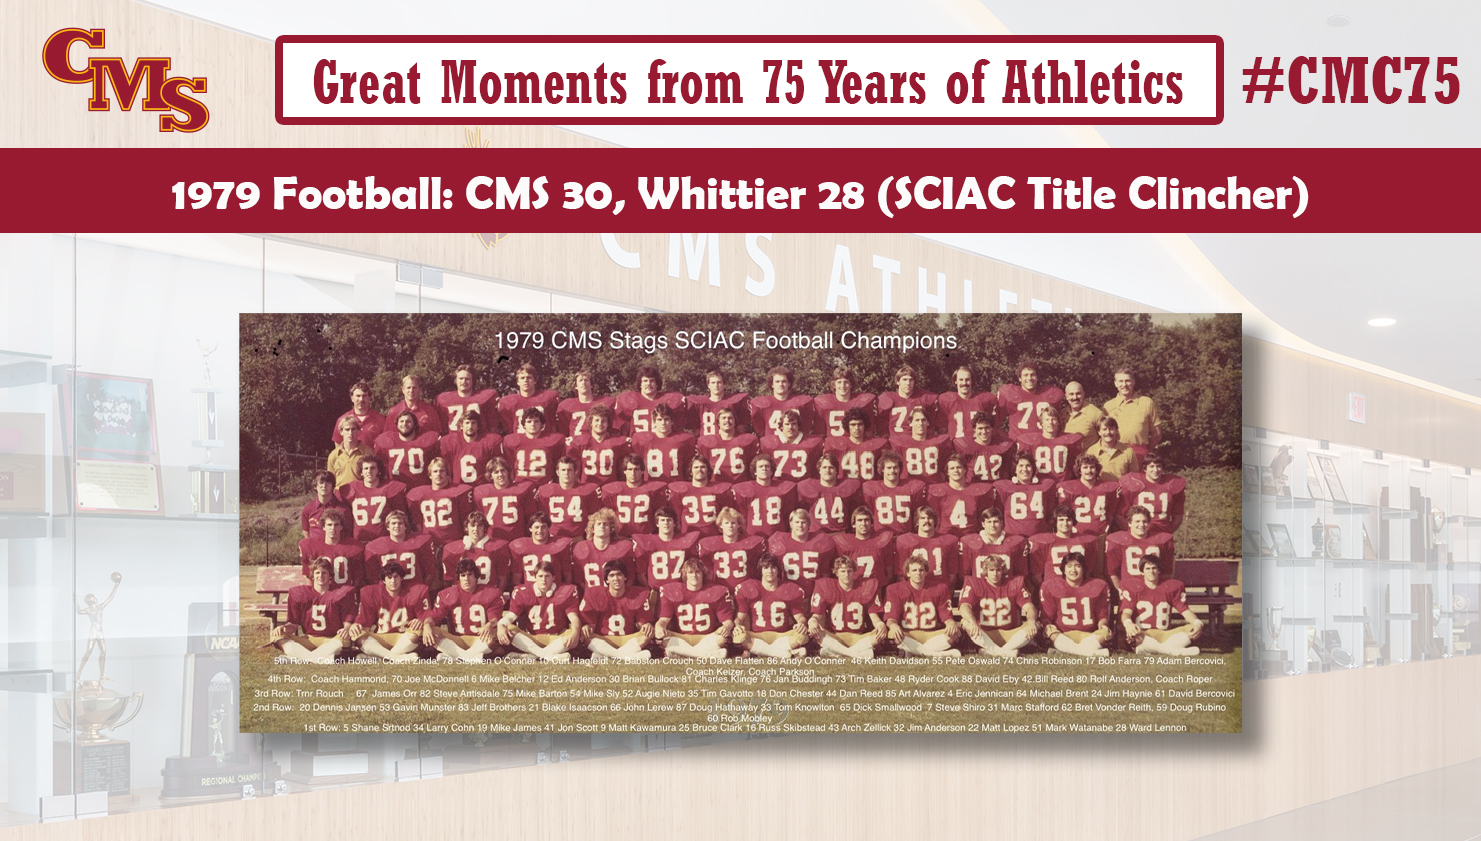 The 1979 CMS Football team photo. Words over the photo read, Great Moments from 75 Years of Athletics, 1979 Football: CMS 30, Whittier 28 (SCIAC Title Clincher).